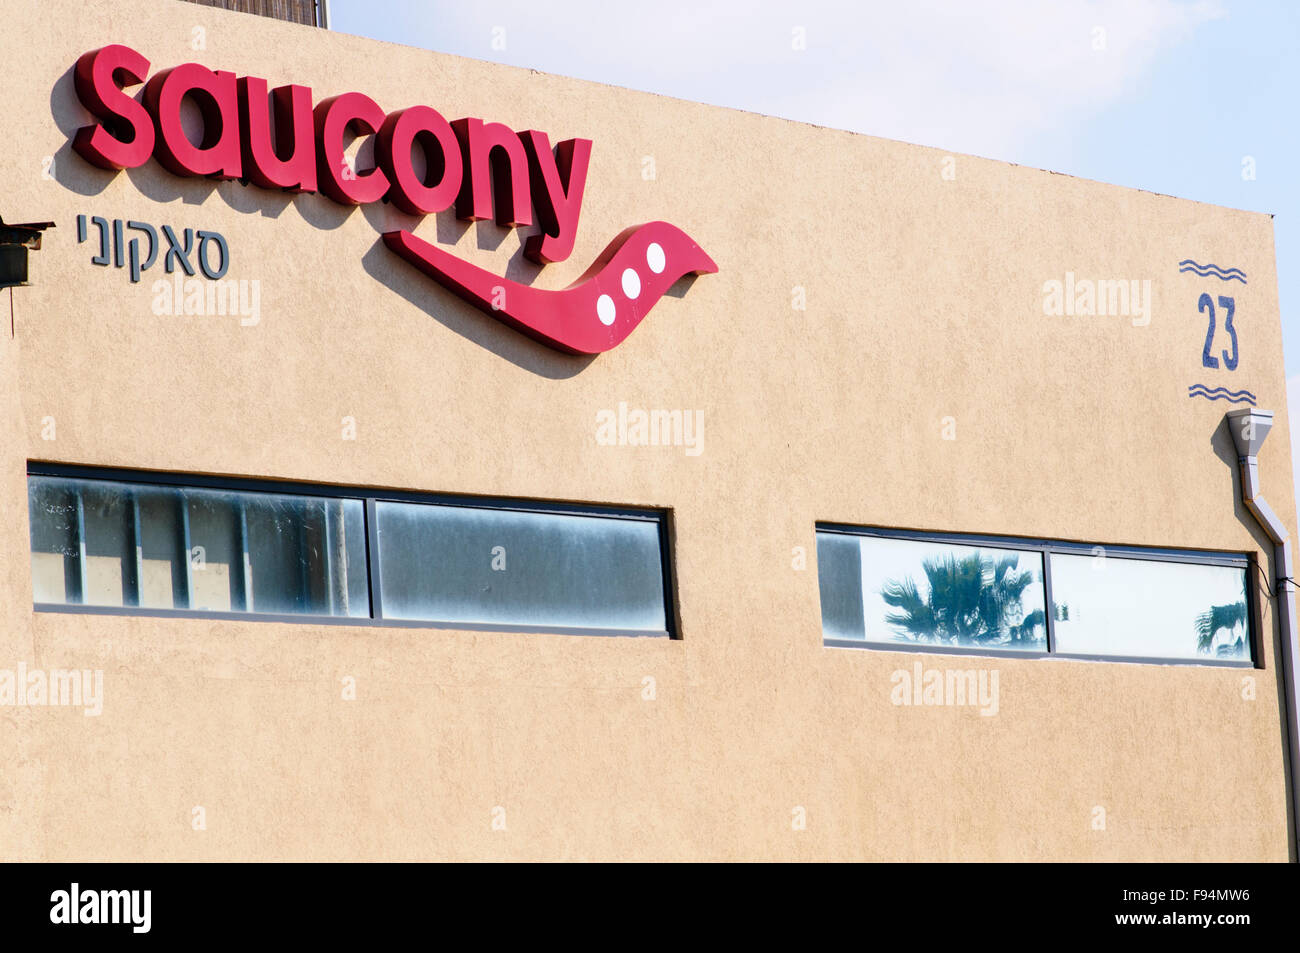 Saucony , logo on shop front Photographed in Tel Aviv, Israel Stock Photo -  Alamy